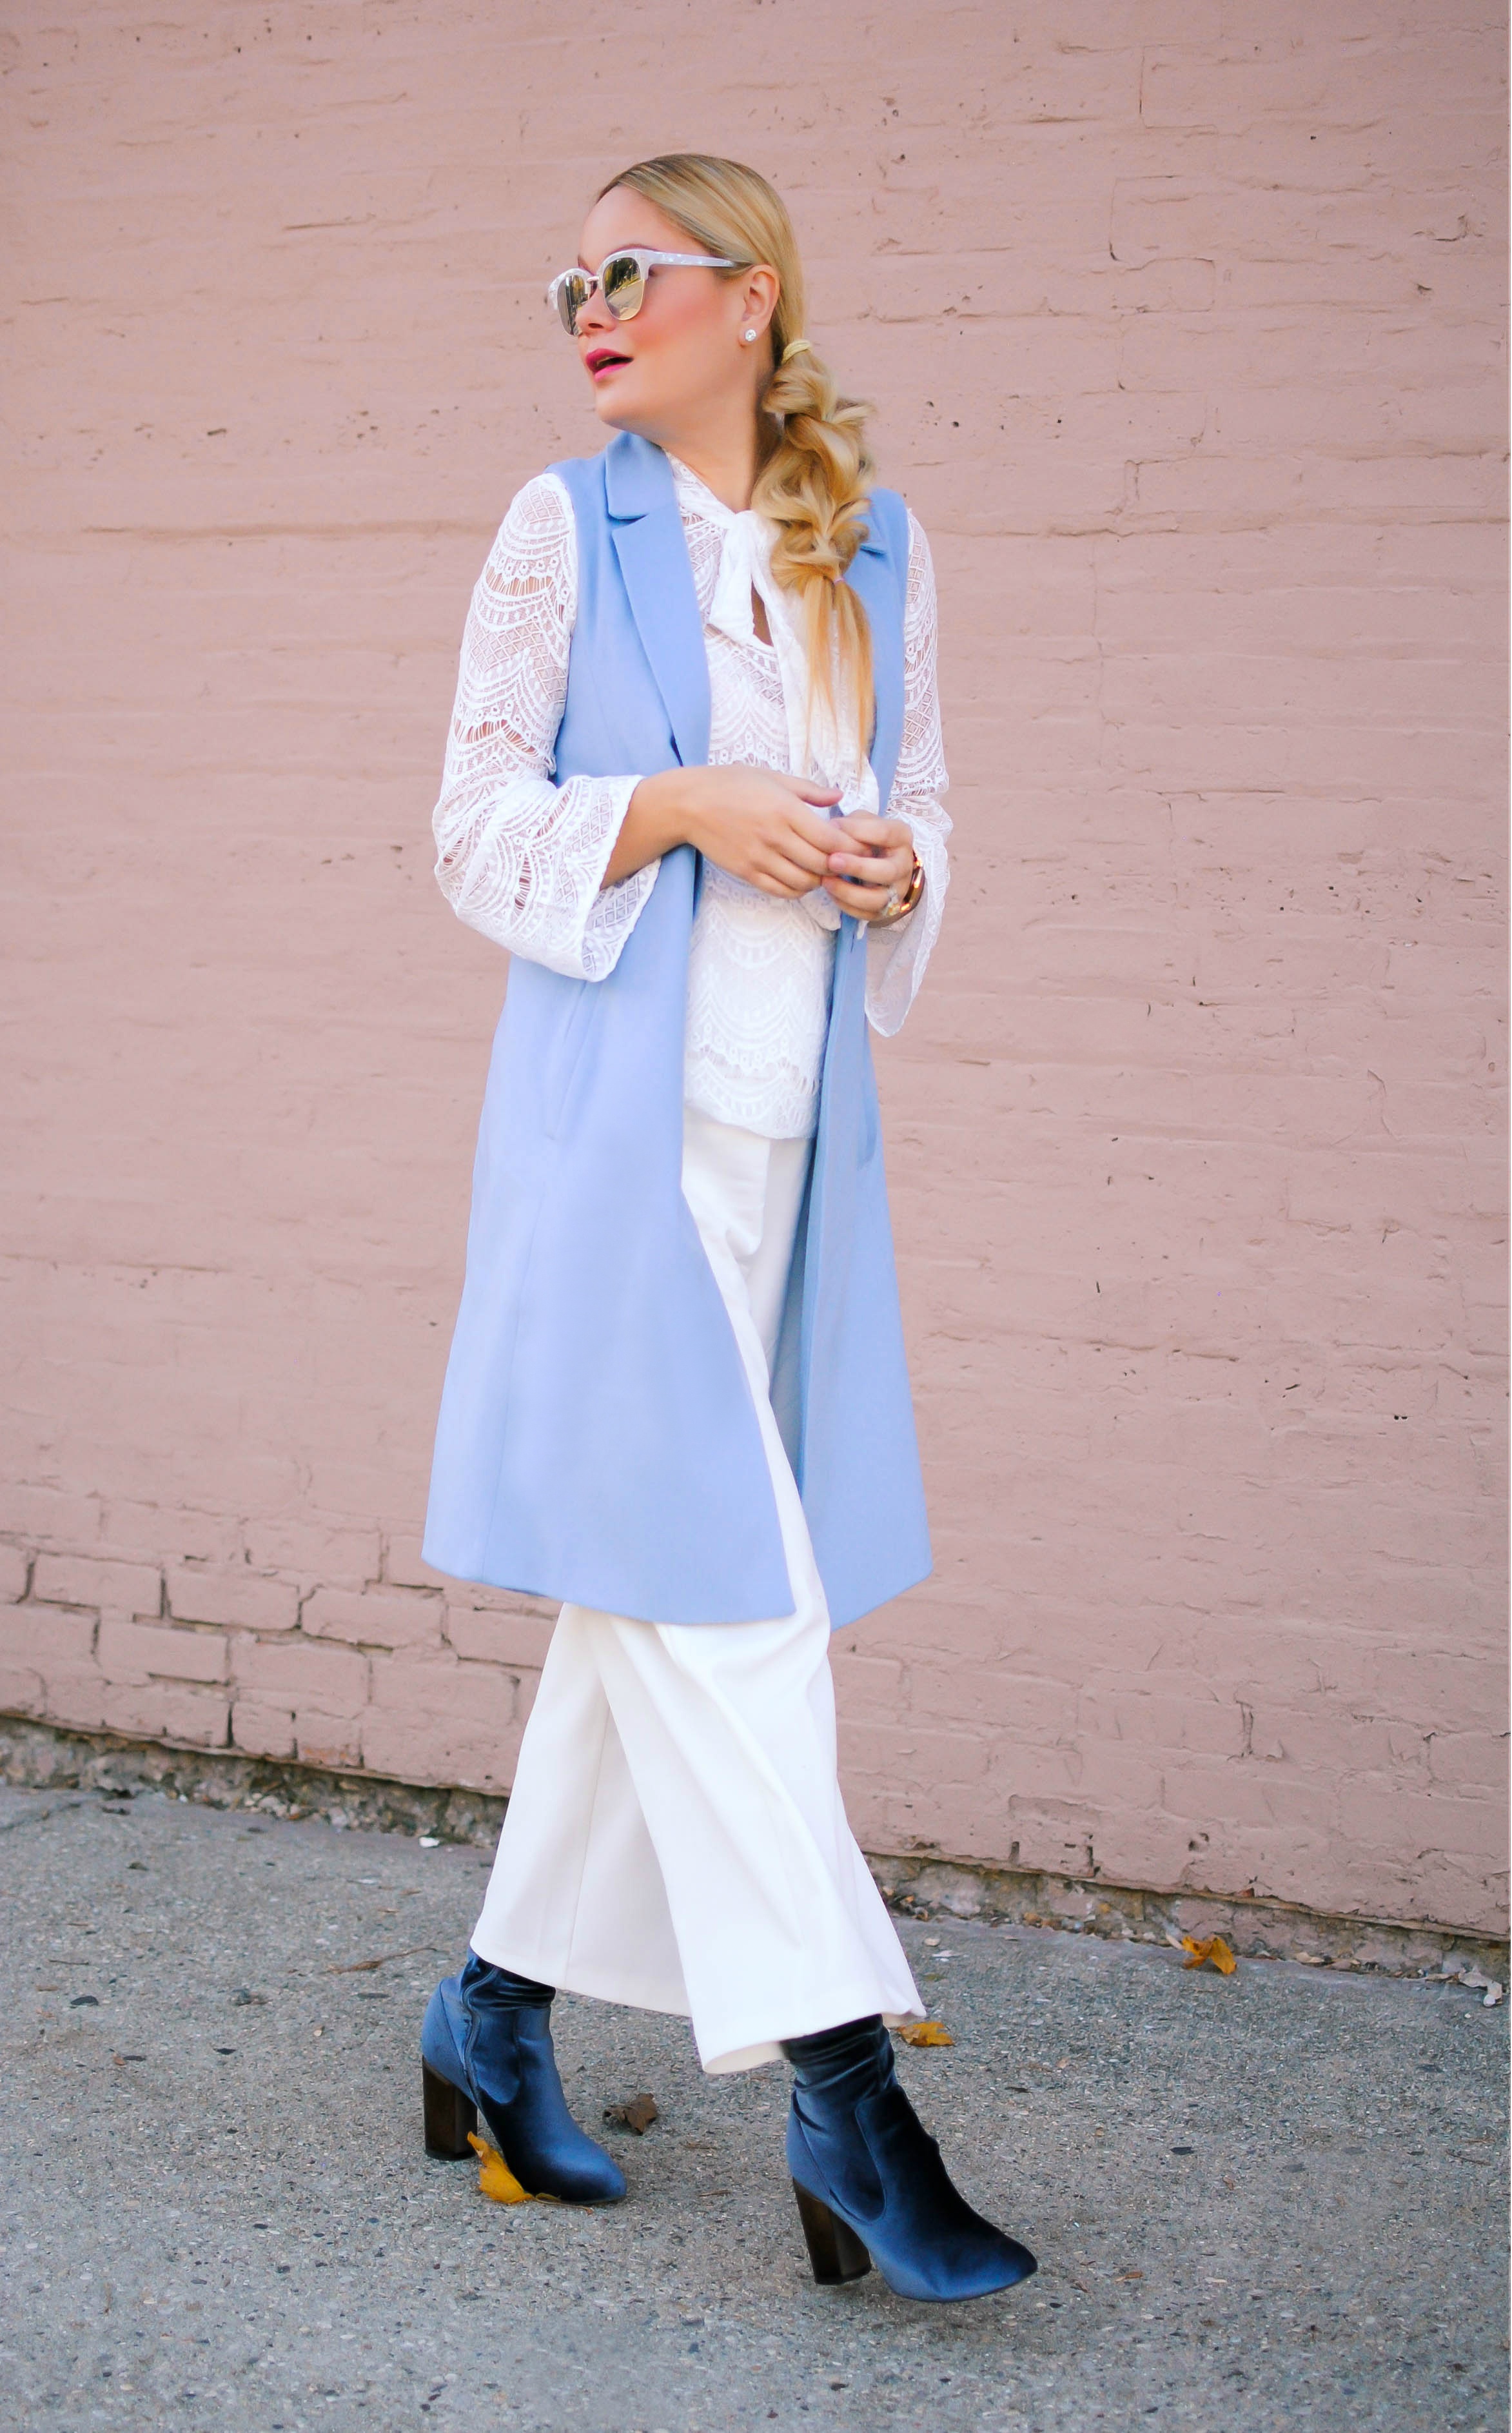 vanessa-lambert-blogger-behind-what-would-v-wear-demonstrates-how-to-brighten-your-winter-wardrobe-wearing-a-light-blue-oversized-vest_4